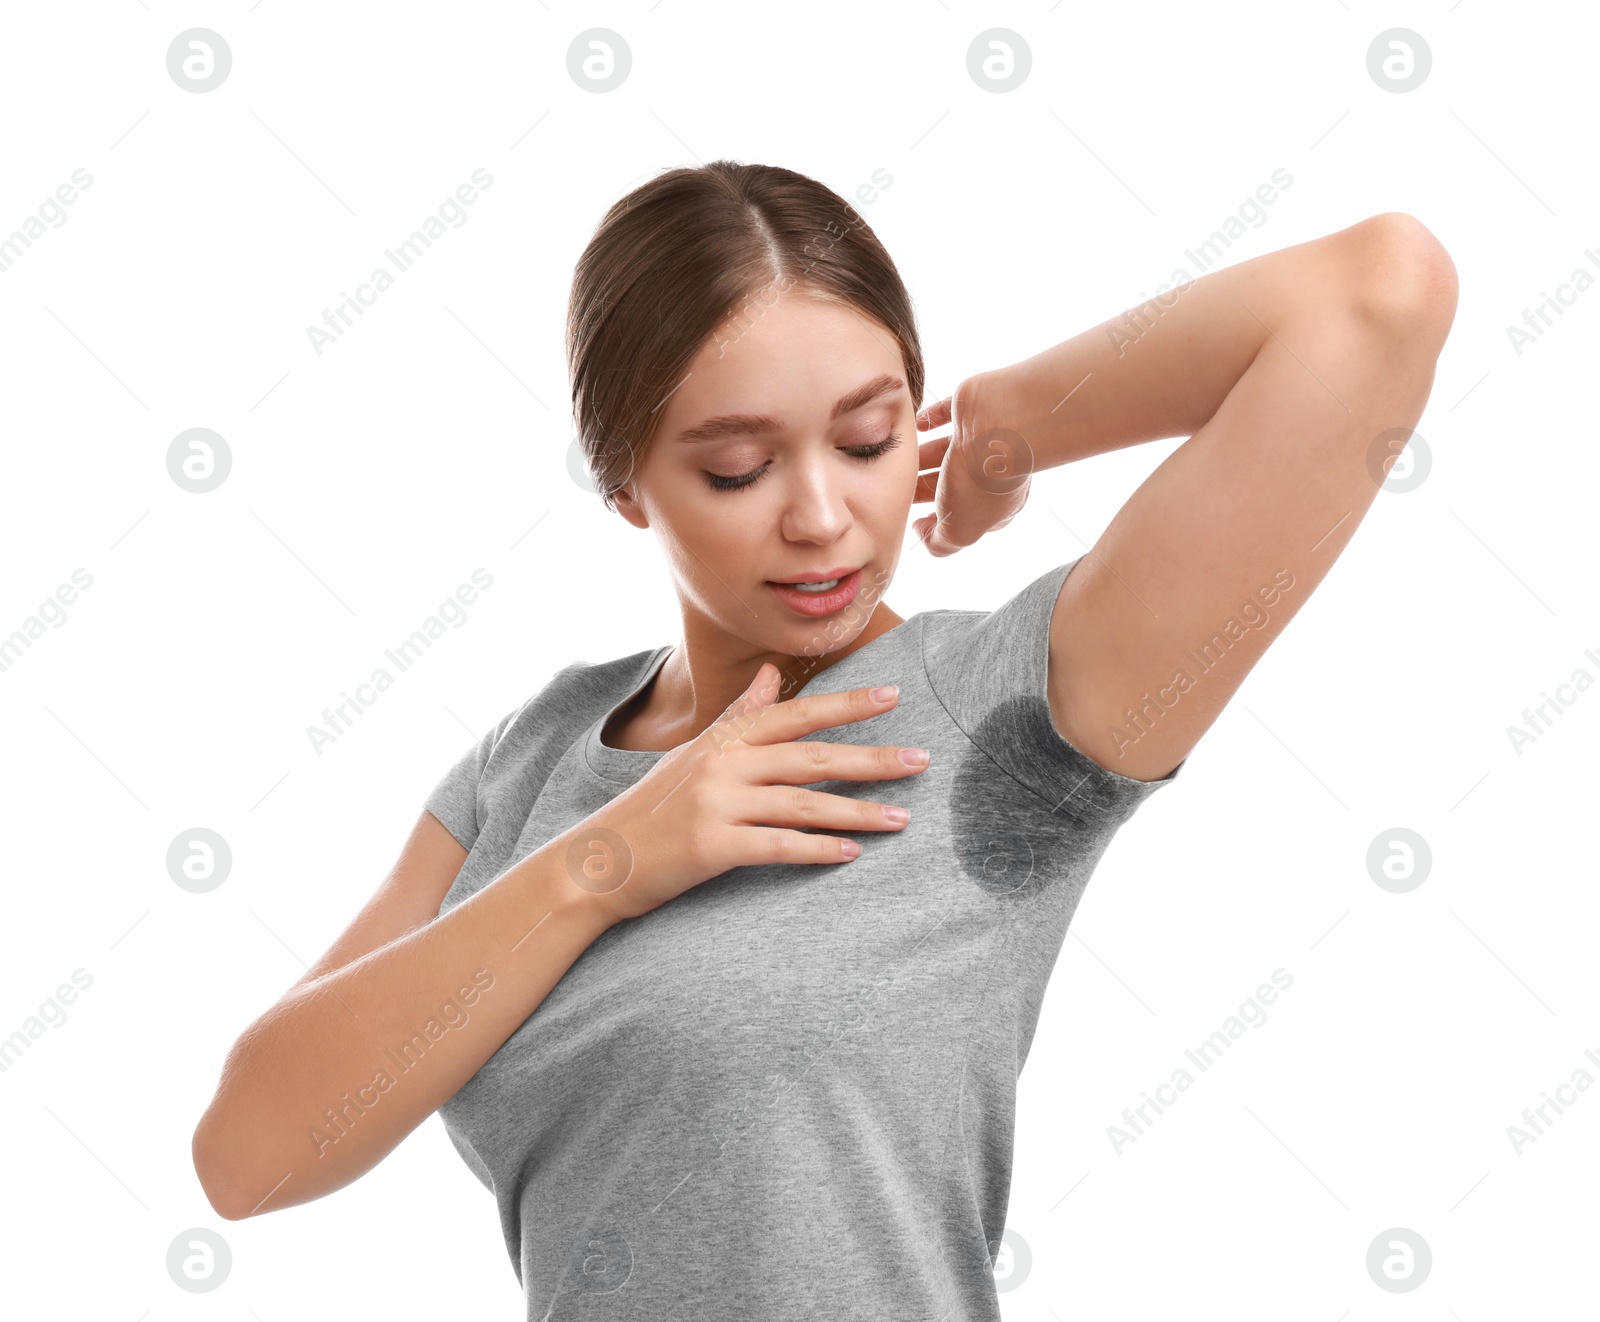 Photo of Young woman with sweat stain on her clothes against white background. Using deodorant